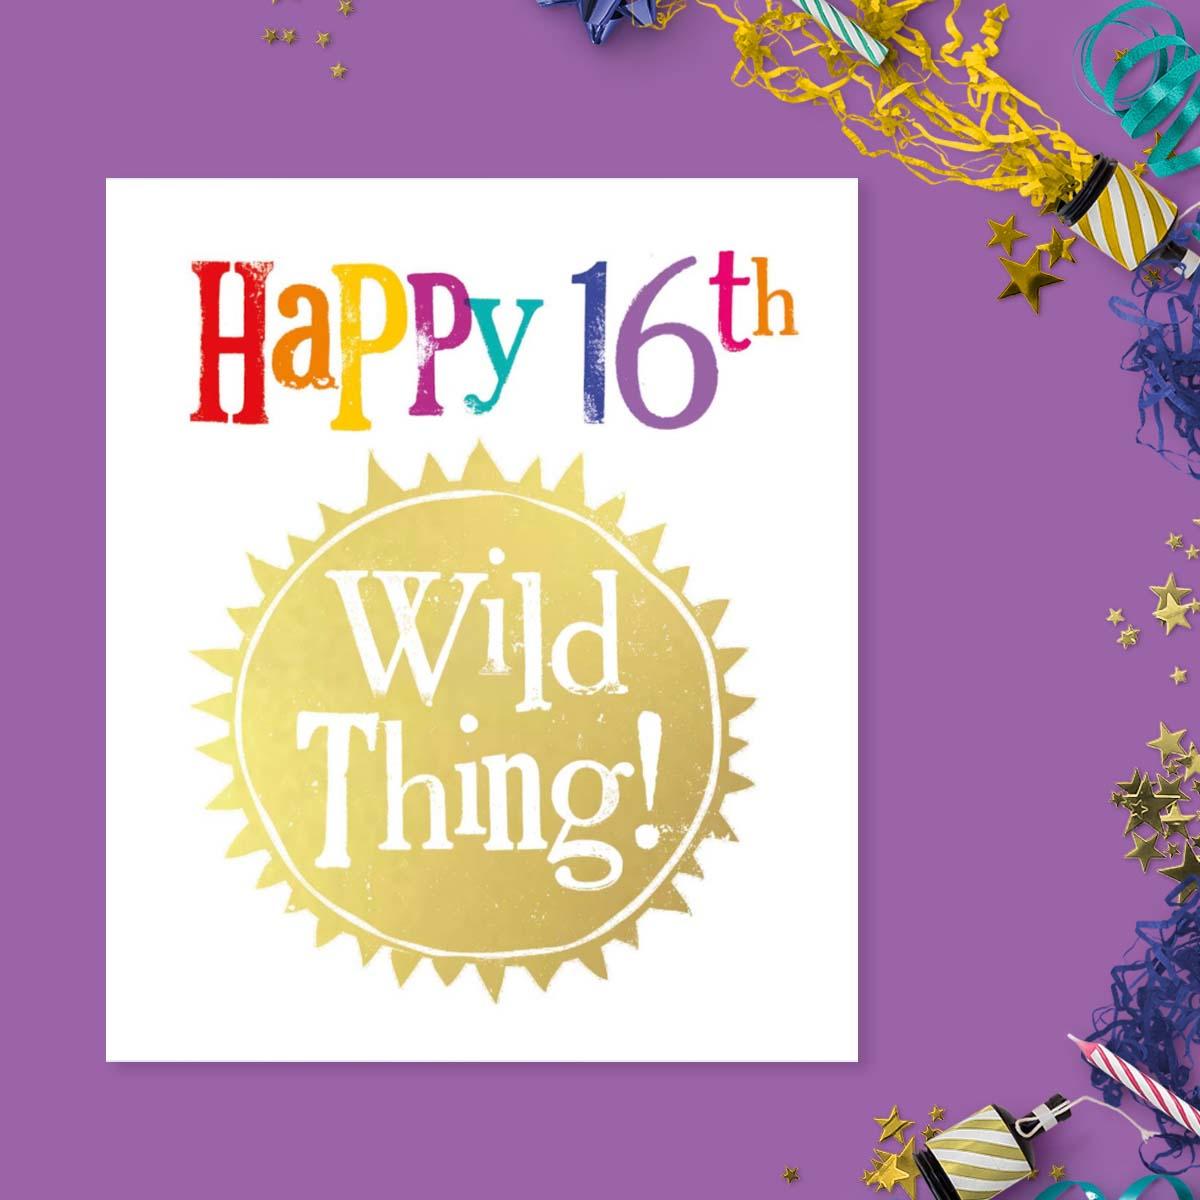 Happy 16th Wild Thing! Card Front Image